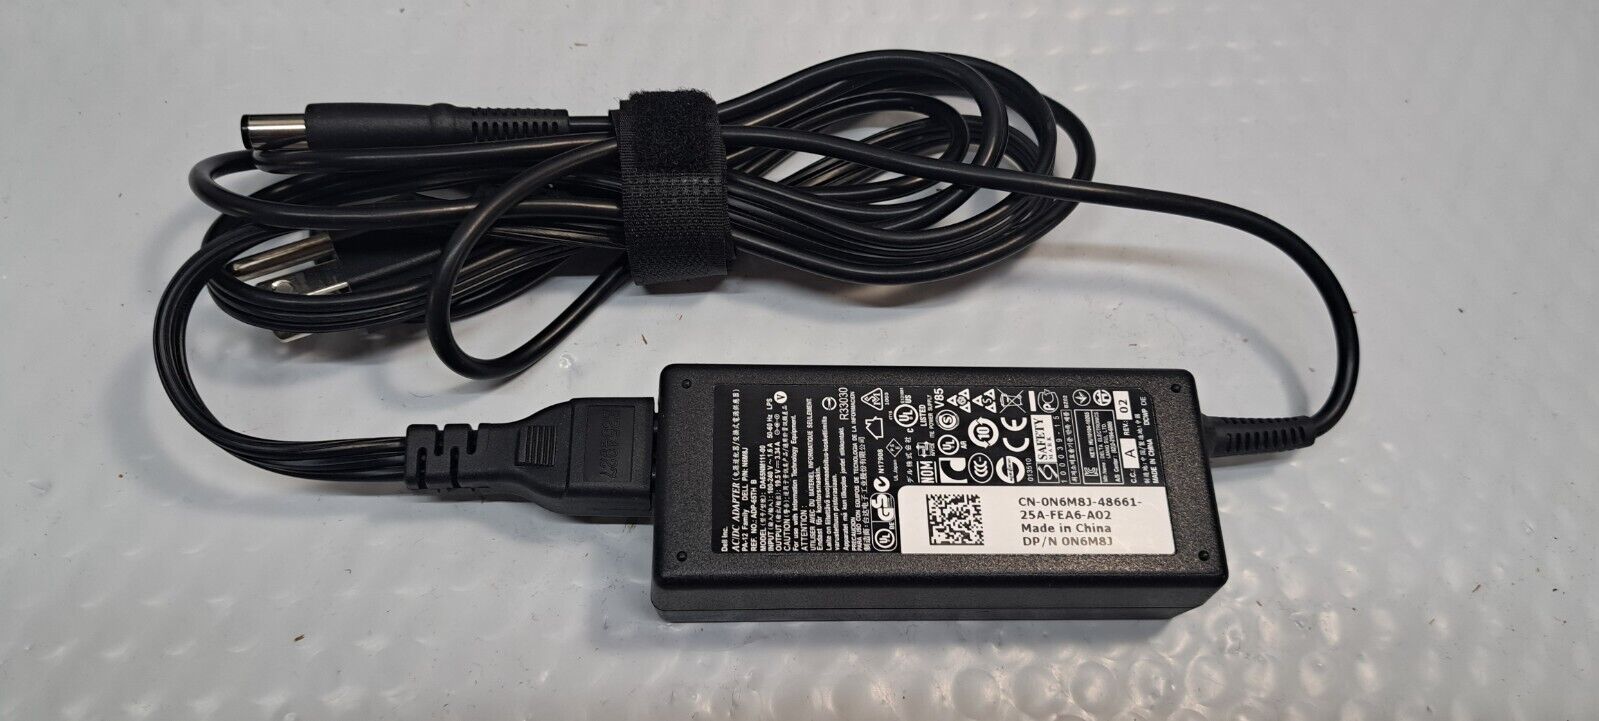 DELL 0N6M8J 19.5V 3.34A 65W Genuine Original AC Power Adapter Charger